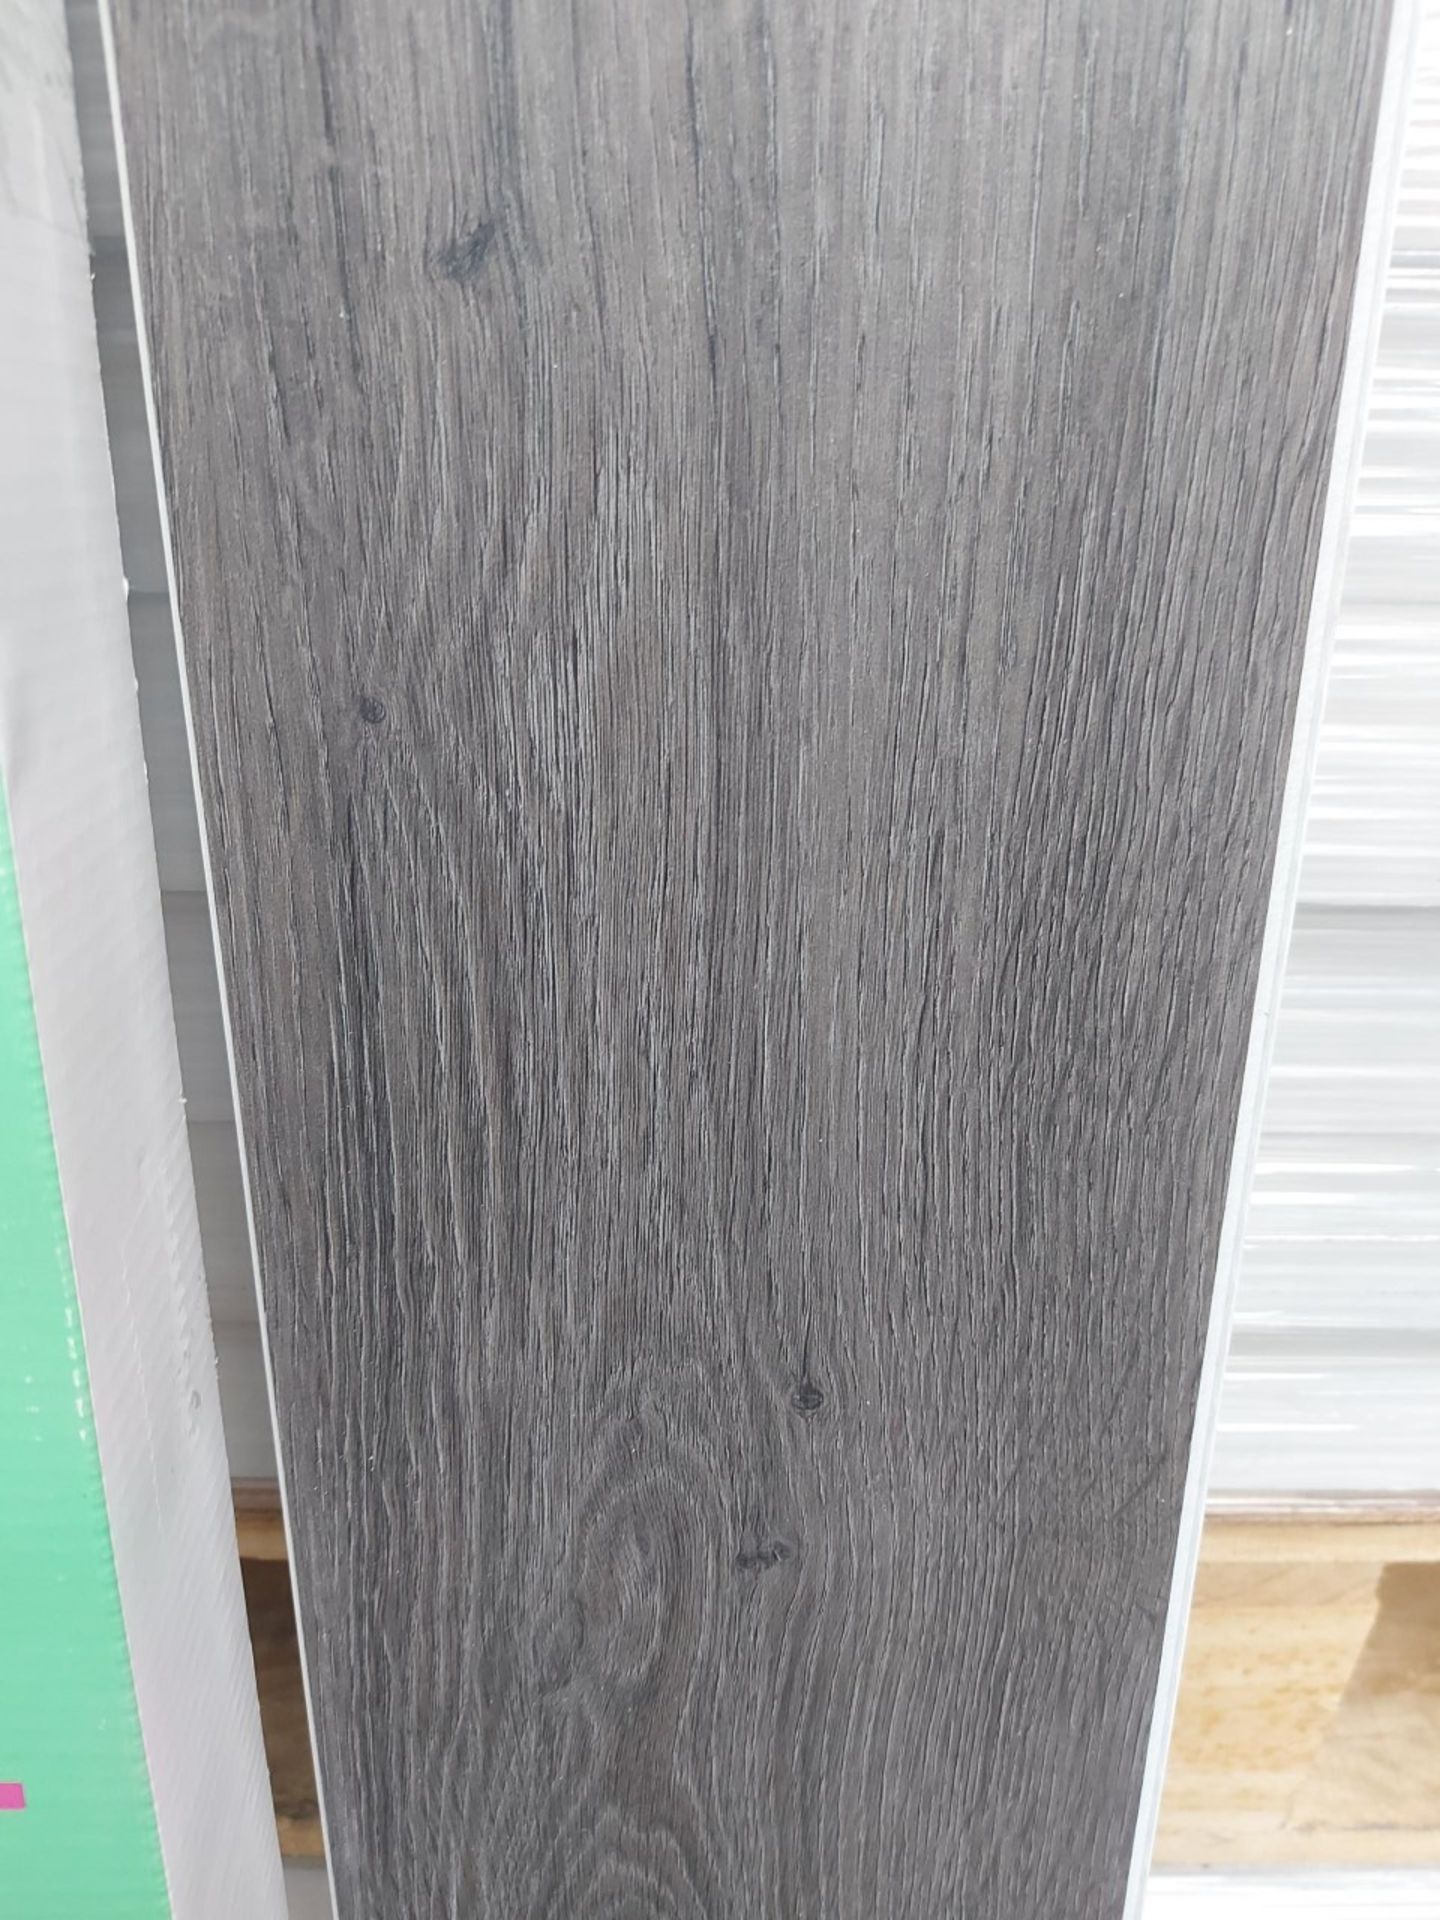 PALLET TO CONTAIN 10 x PACKS OF NEW BACHETA LUXURY VINYL CLICK PLANK FLOORING. RRP £58 PER PACK. - Image 3 of 3